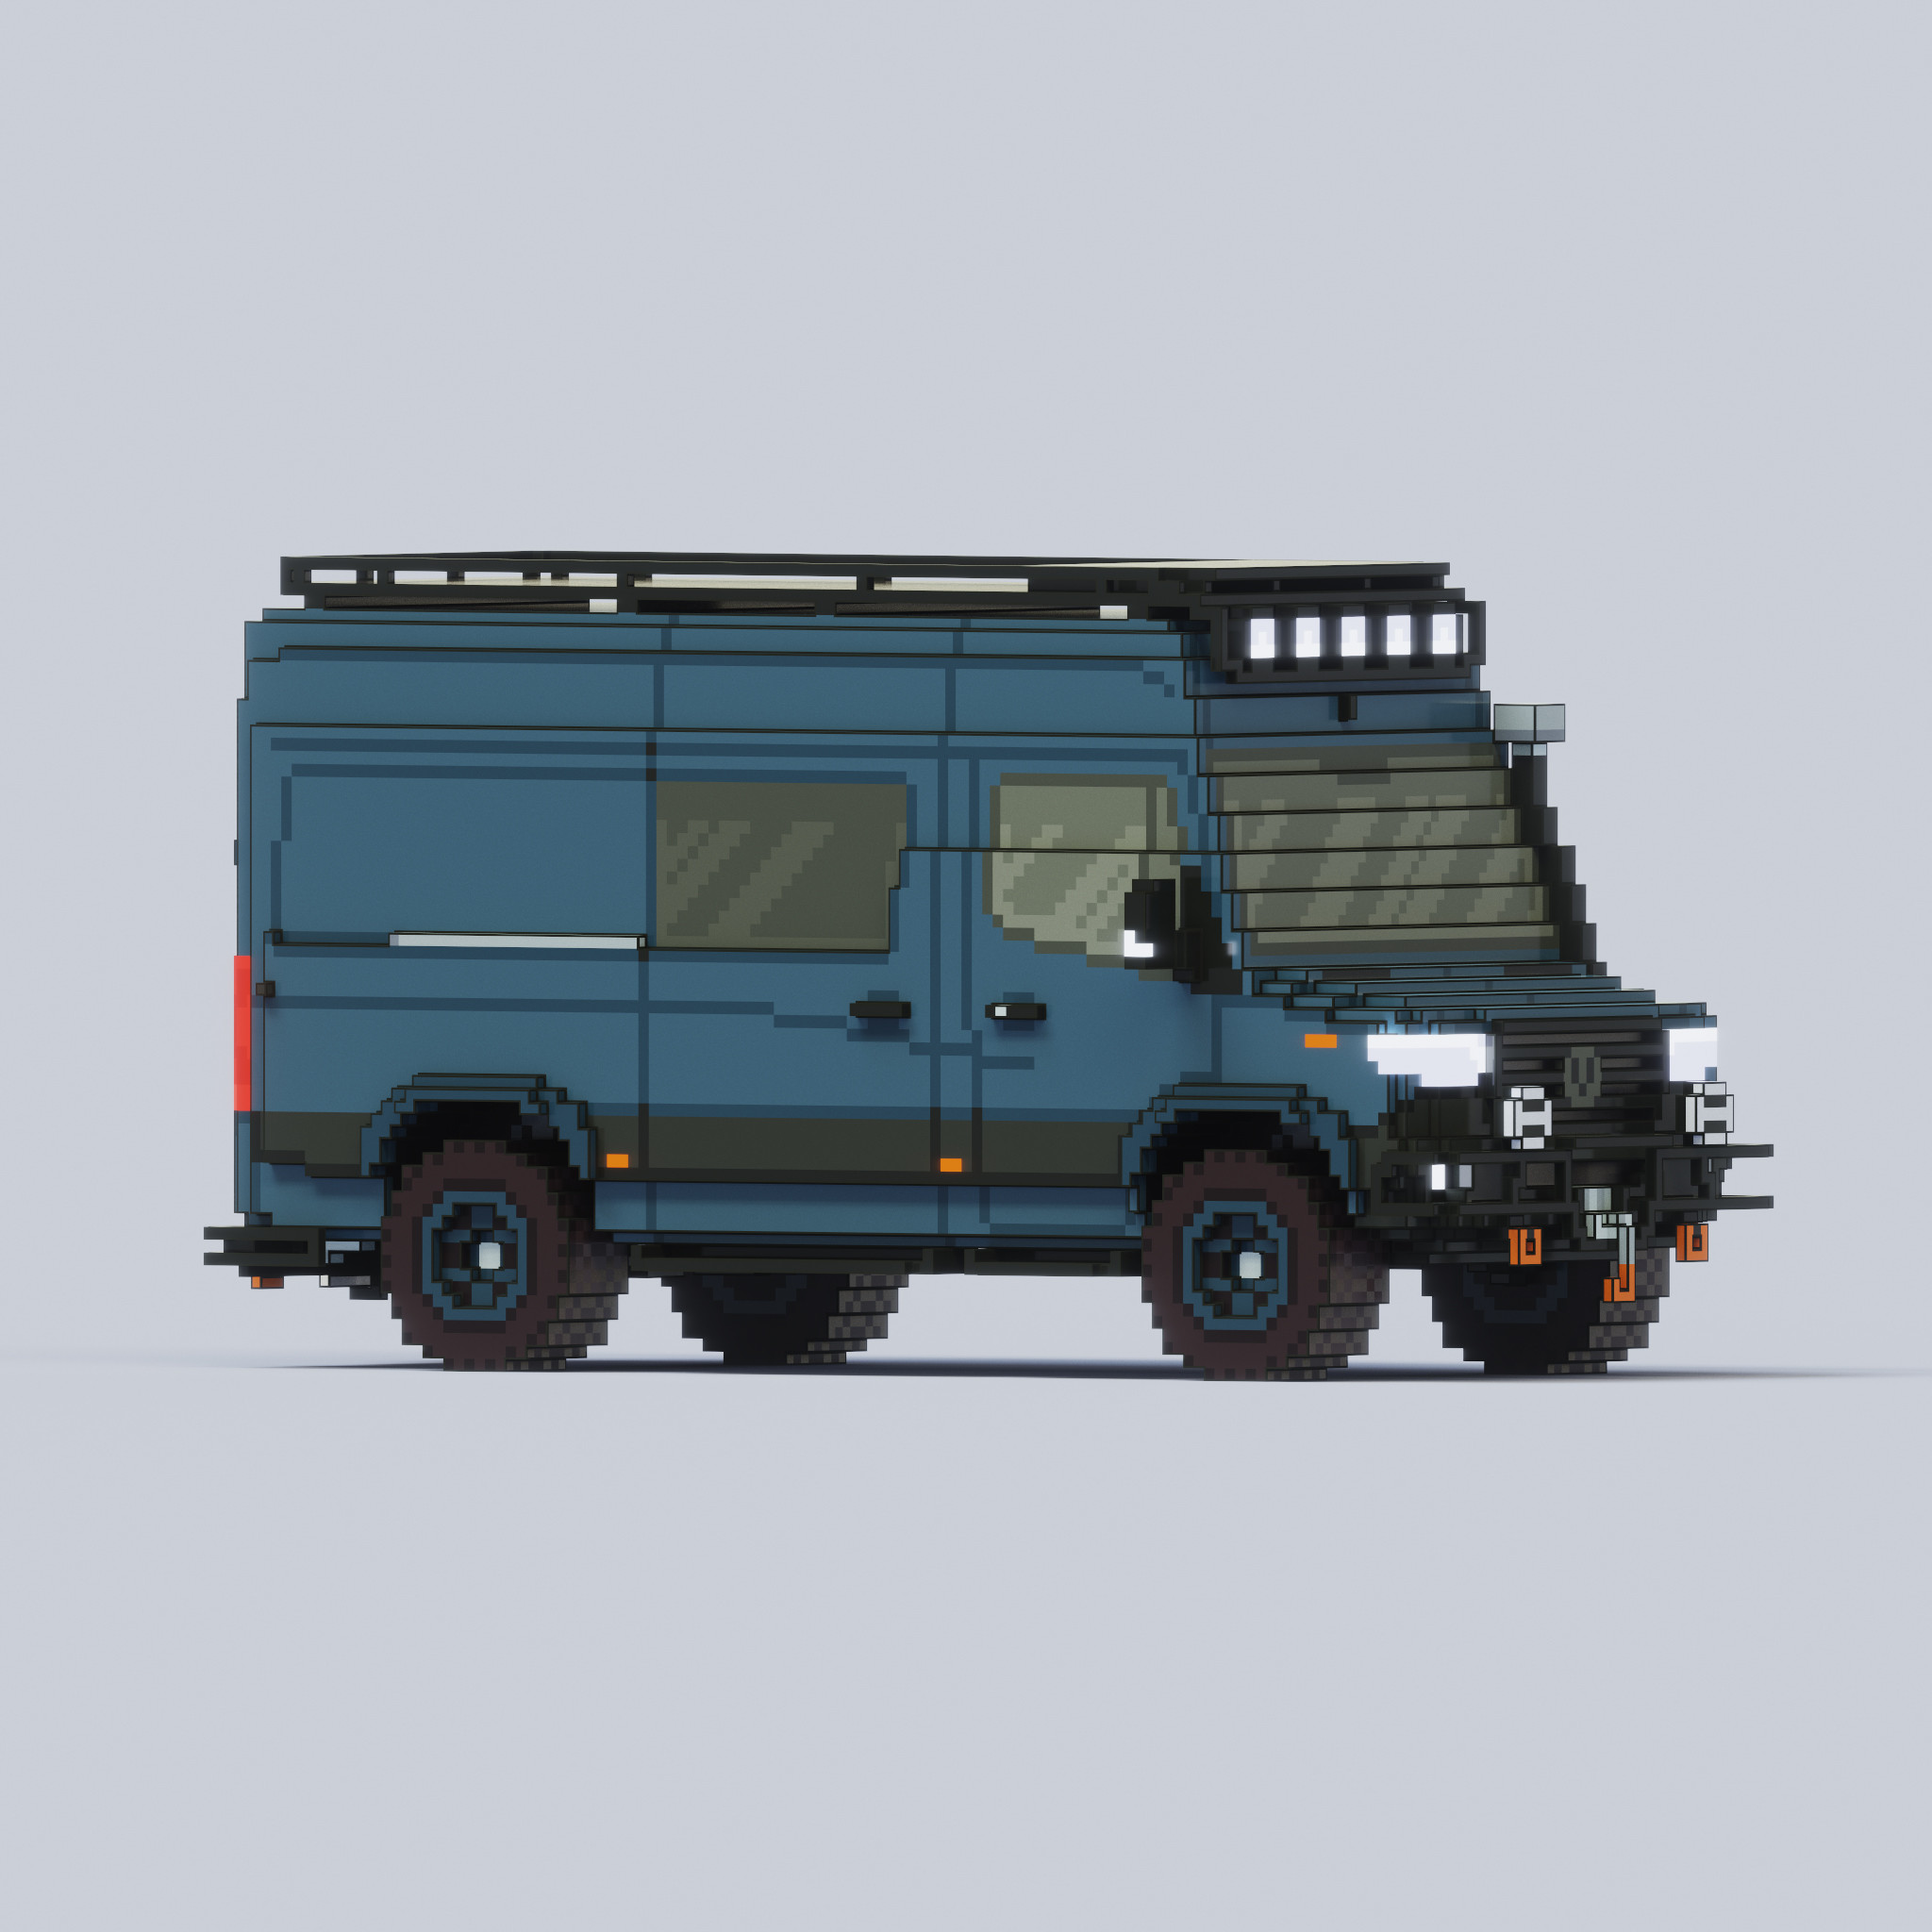 Voxel Voxel Mercedes-Benz Sprinter Van (Off-Road Conversion Kit) created and rendered using Magicavoxel.